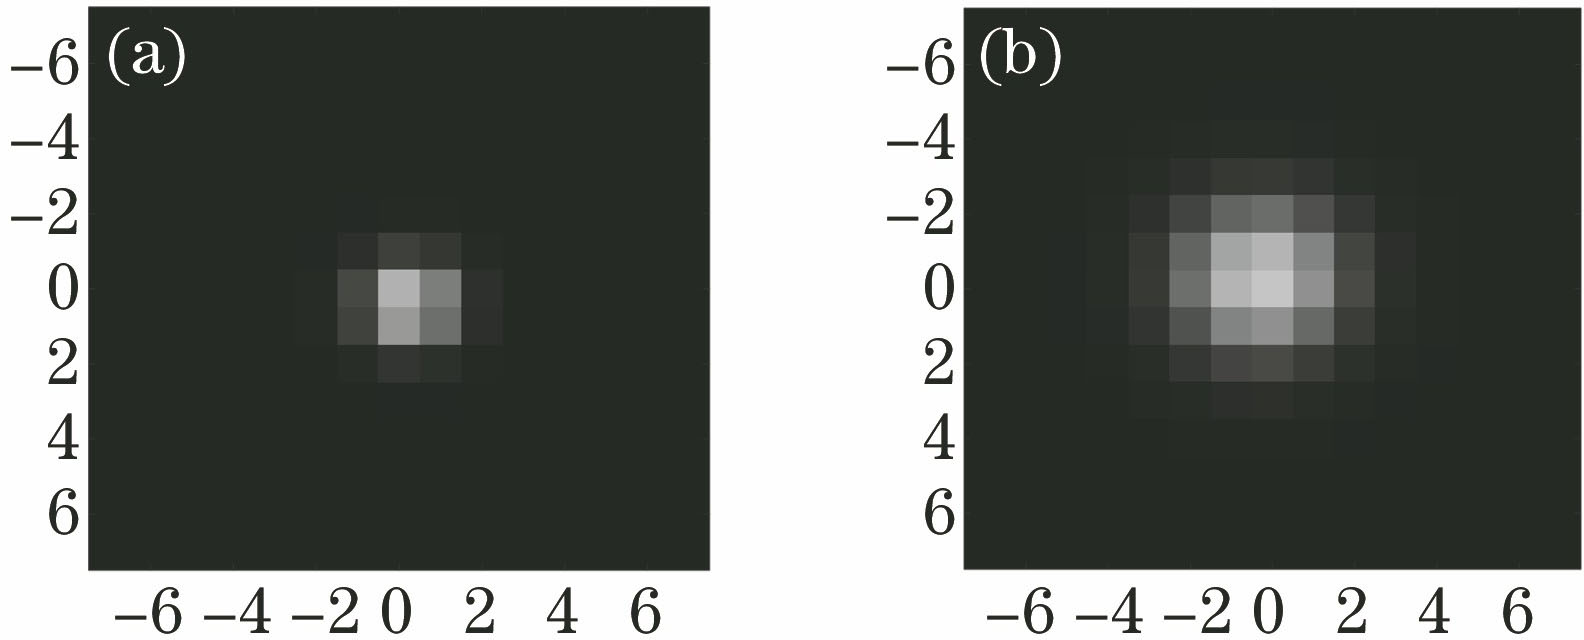 Simulated star point based on IPSF model. (a) σs=0.6 pixel; (b) σs=1.5 pixel